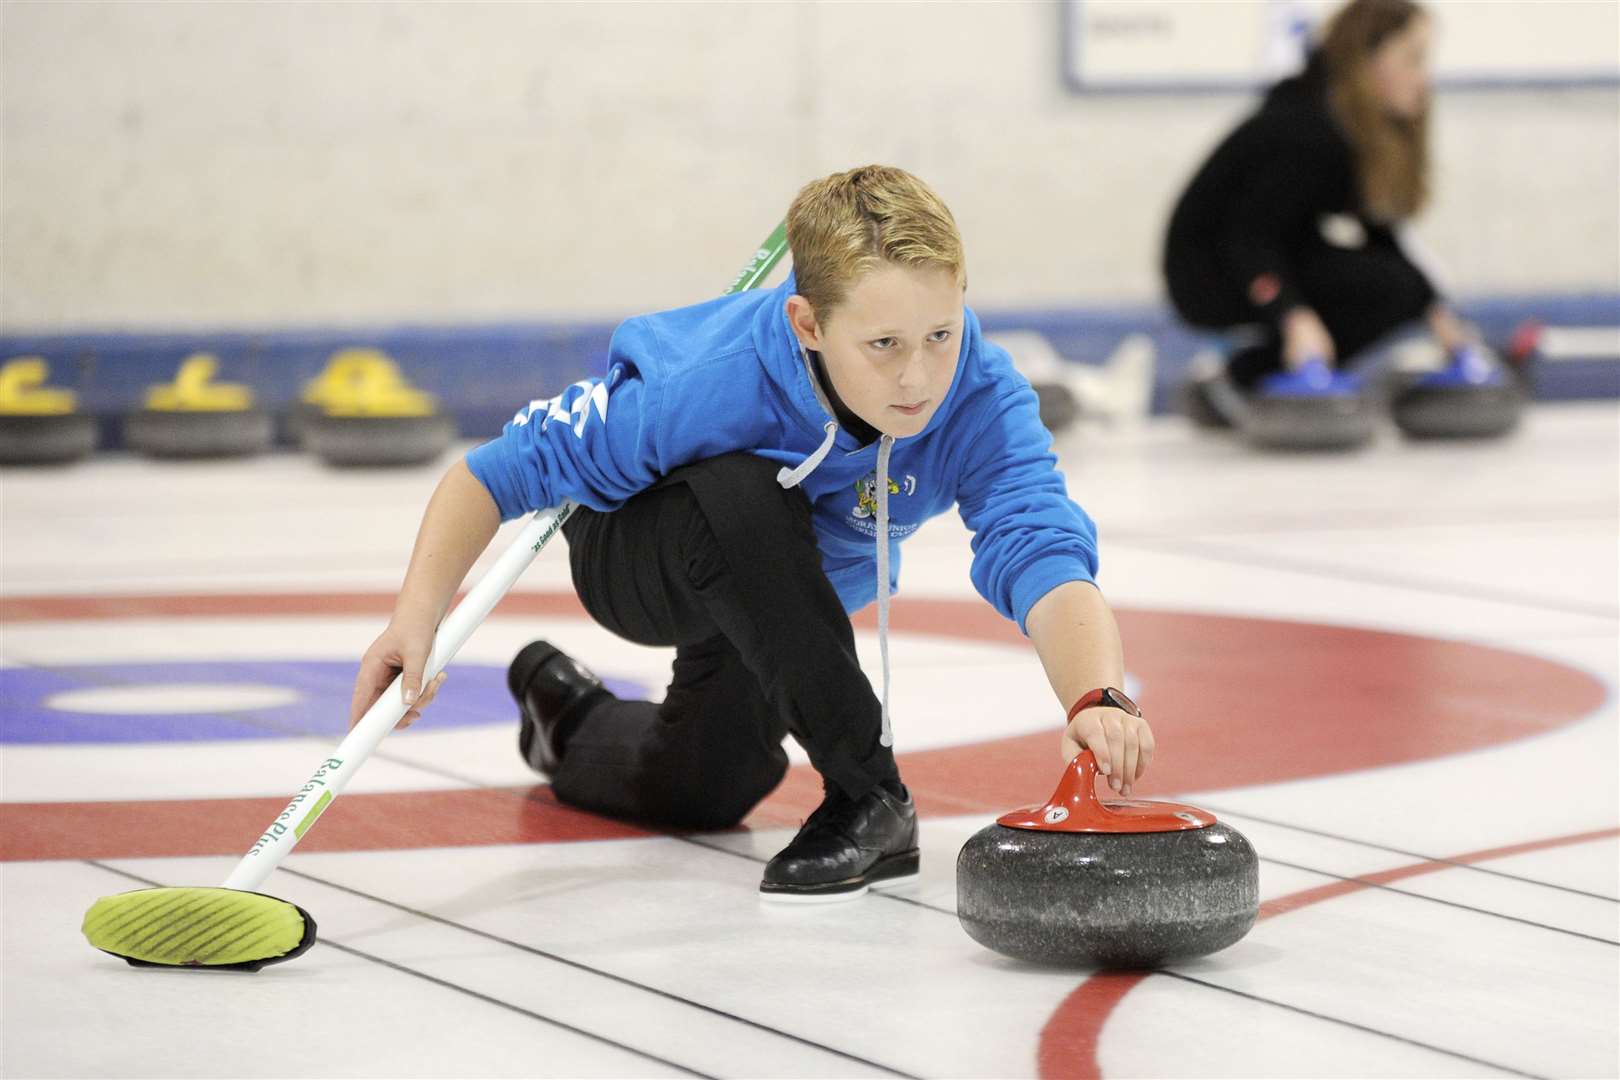 Curling is back at Moray Leisure Centre